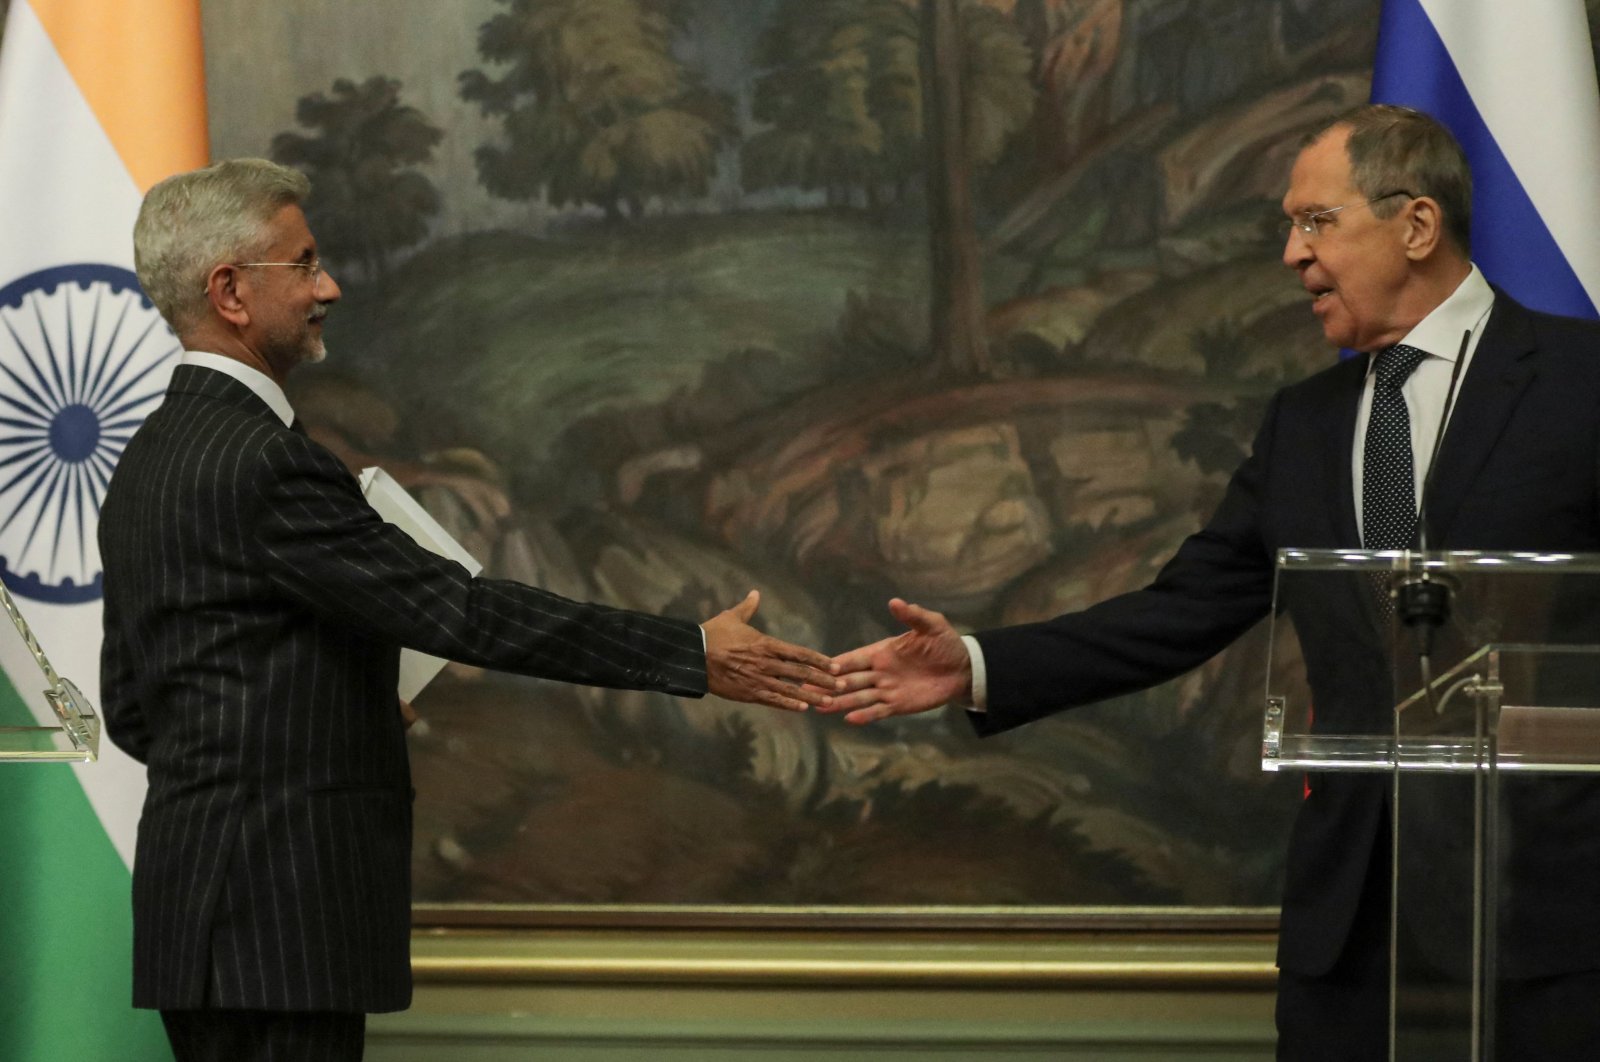 Russian Foreign Minister Sergei Lavrov (R) and his Indian counterpart Subrahmanyam Jaishankar (L) shake hands during a joint press conference following their talks in Moscow, Russia, Nov., 8, 2022. (AFP Photo)